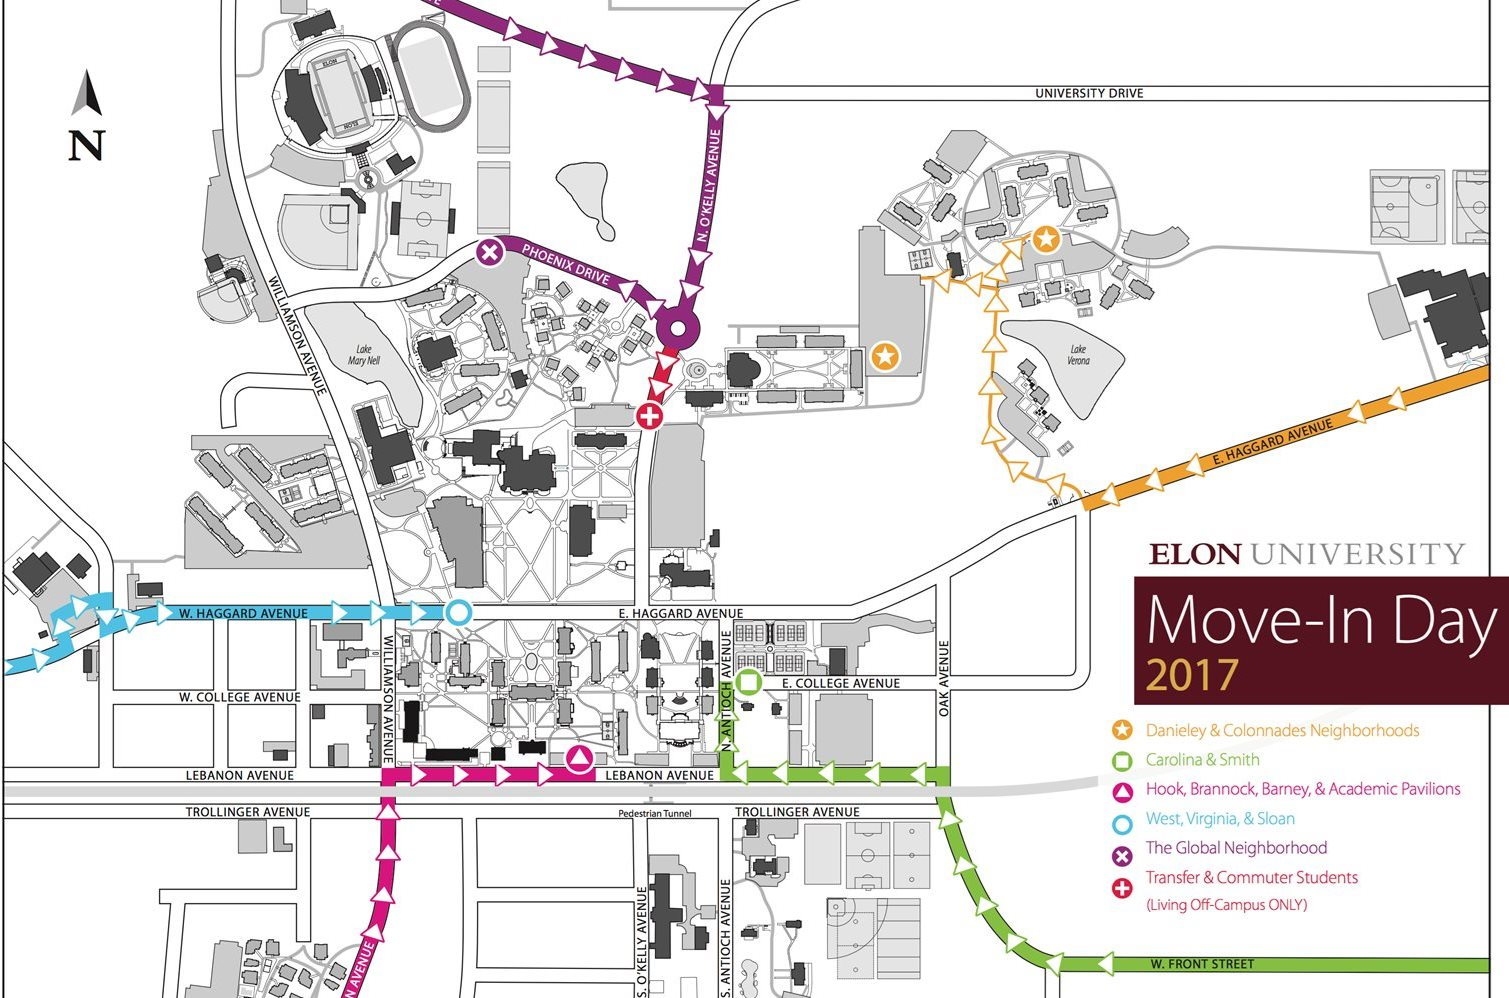 Elon University / Today at Elon / Movein day map shows the routes for